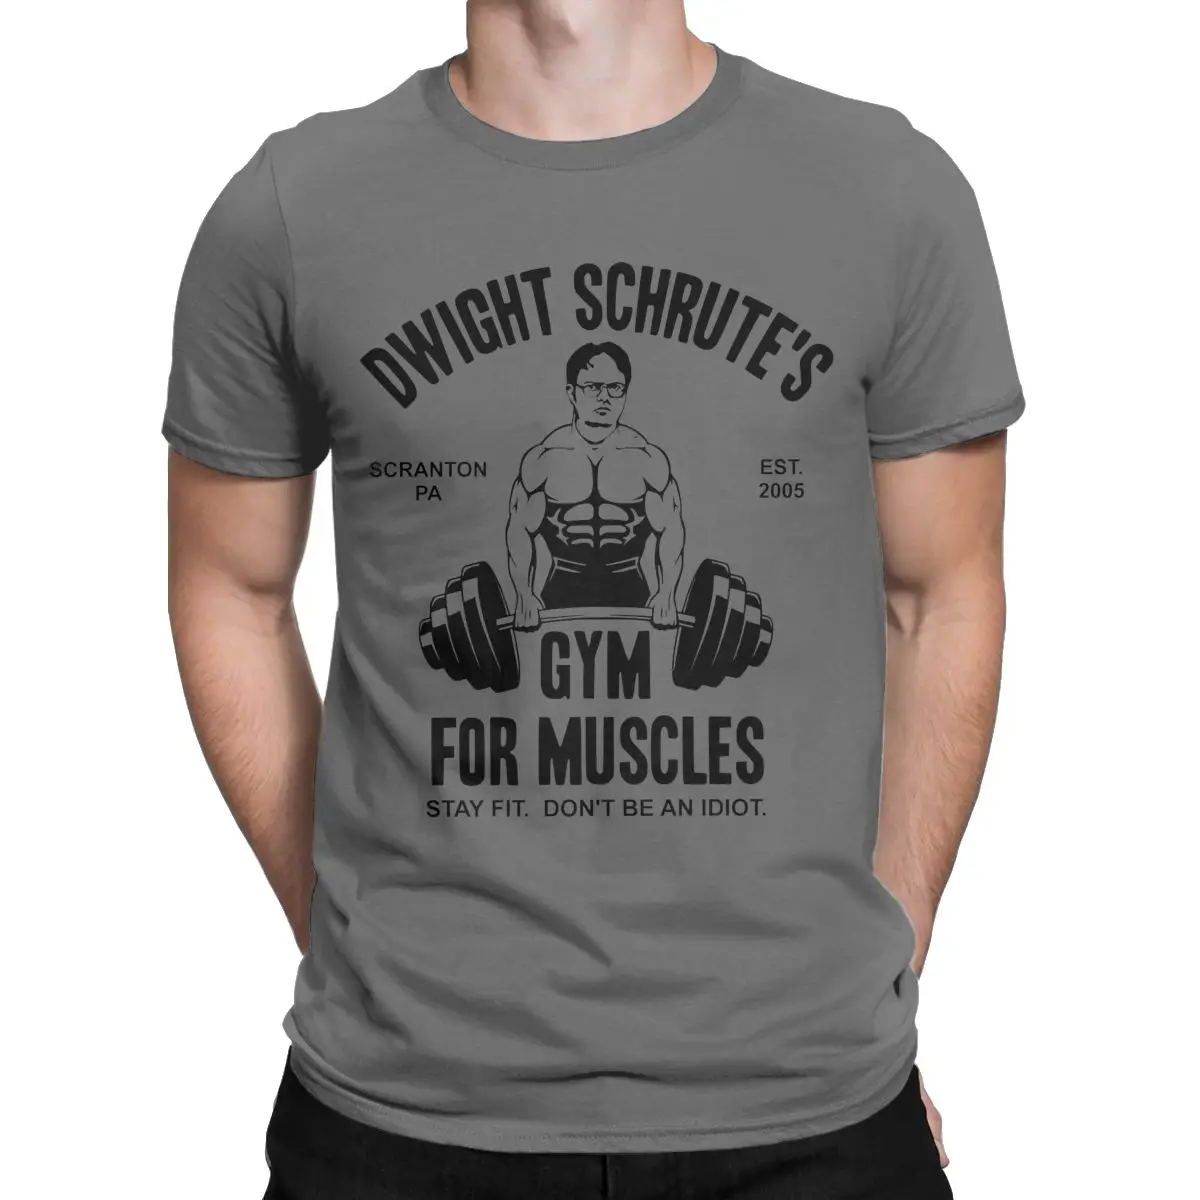 

Dwight Schrute Gym For Muscles The Office T-Shirts for Men Tv Show Pure Cotton Tees Crew Neck Short Sleeve T Shirt Party Clothes